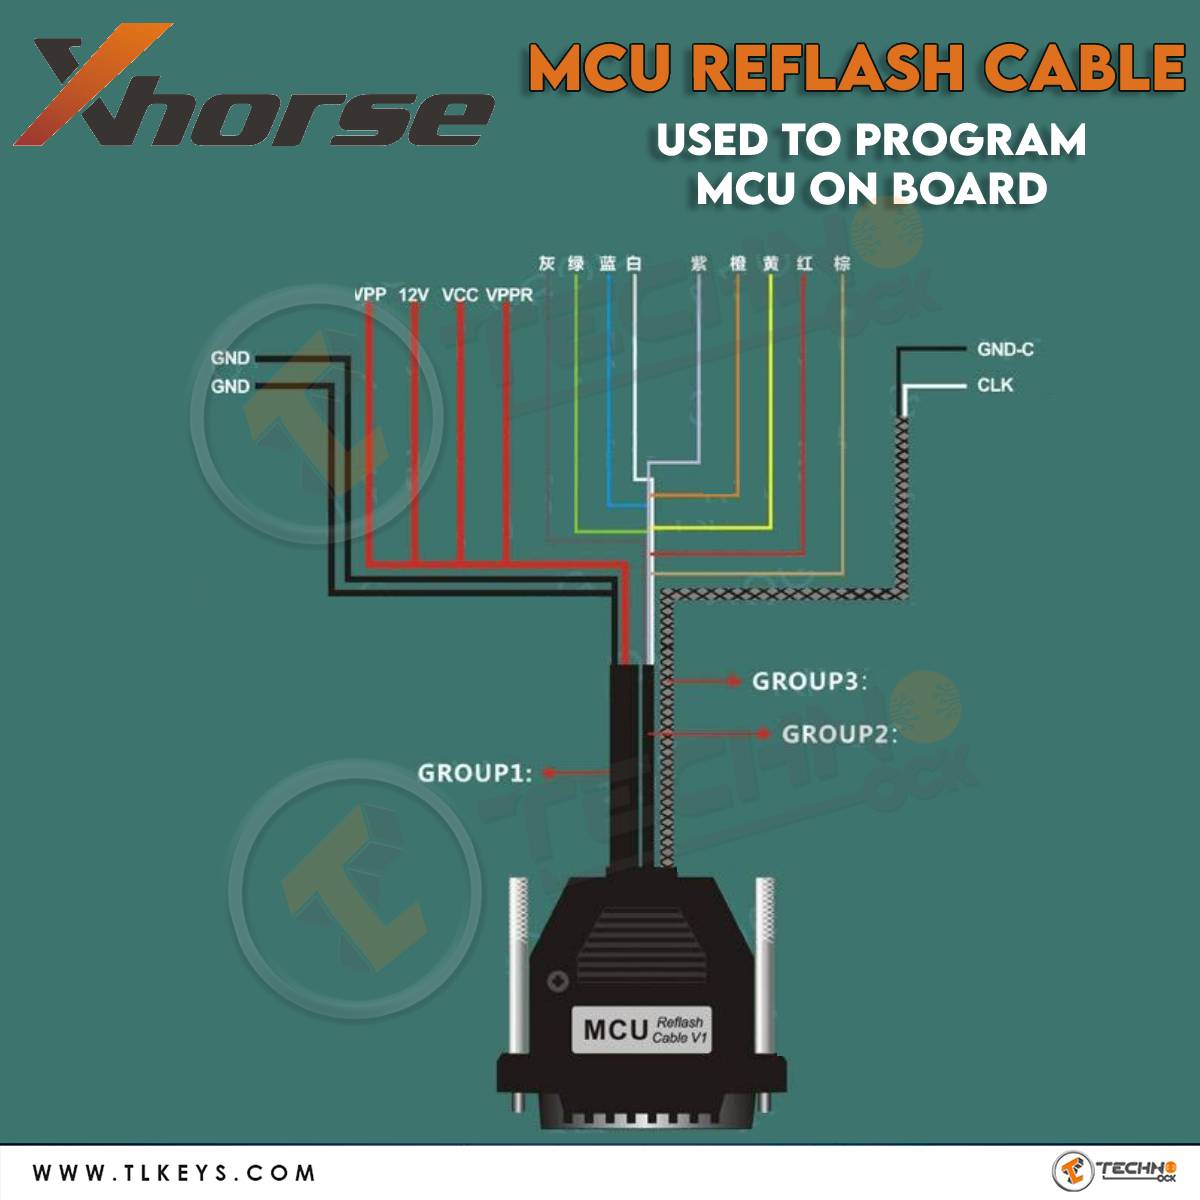  VVDI Prog Cable connect to MCU Reflash Cable